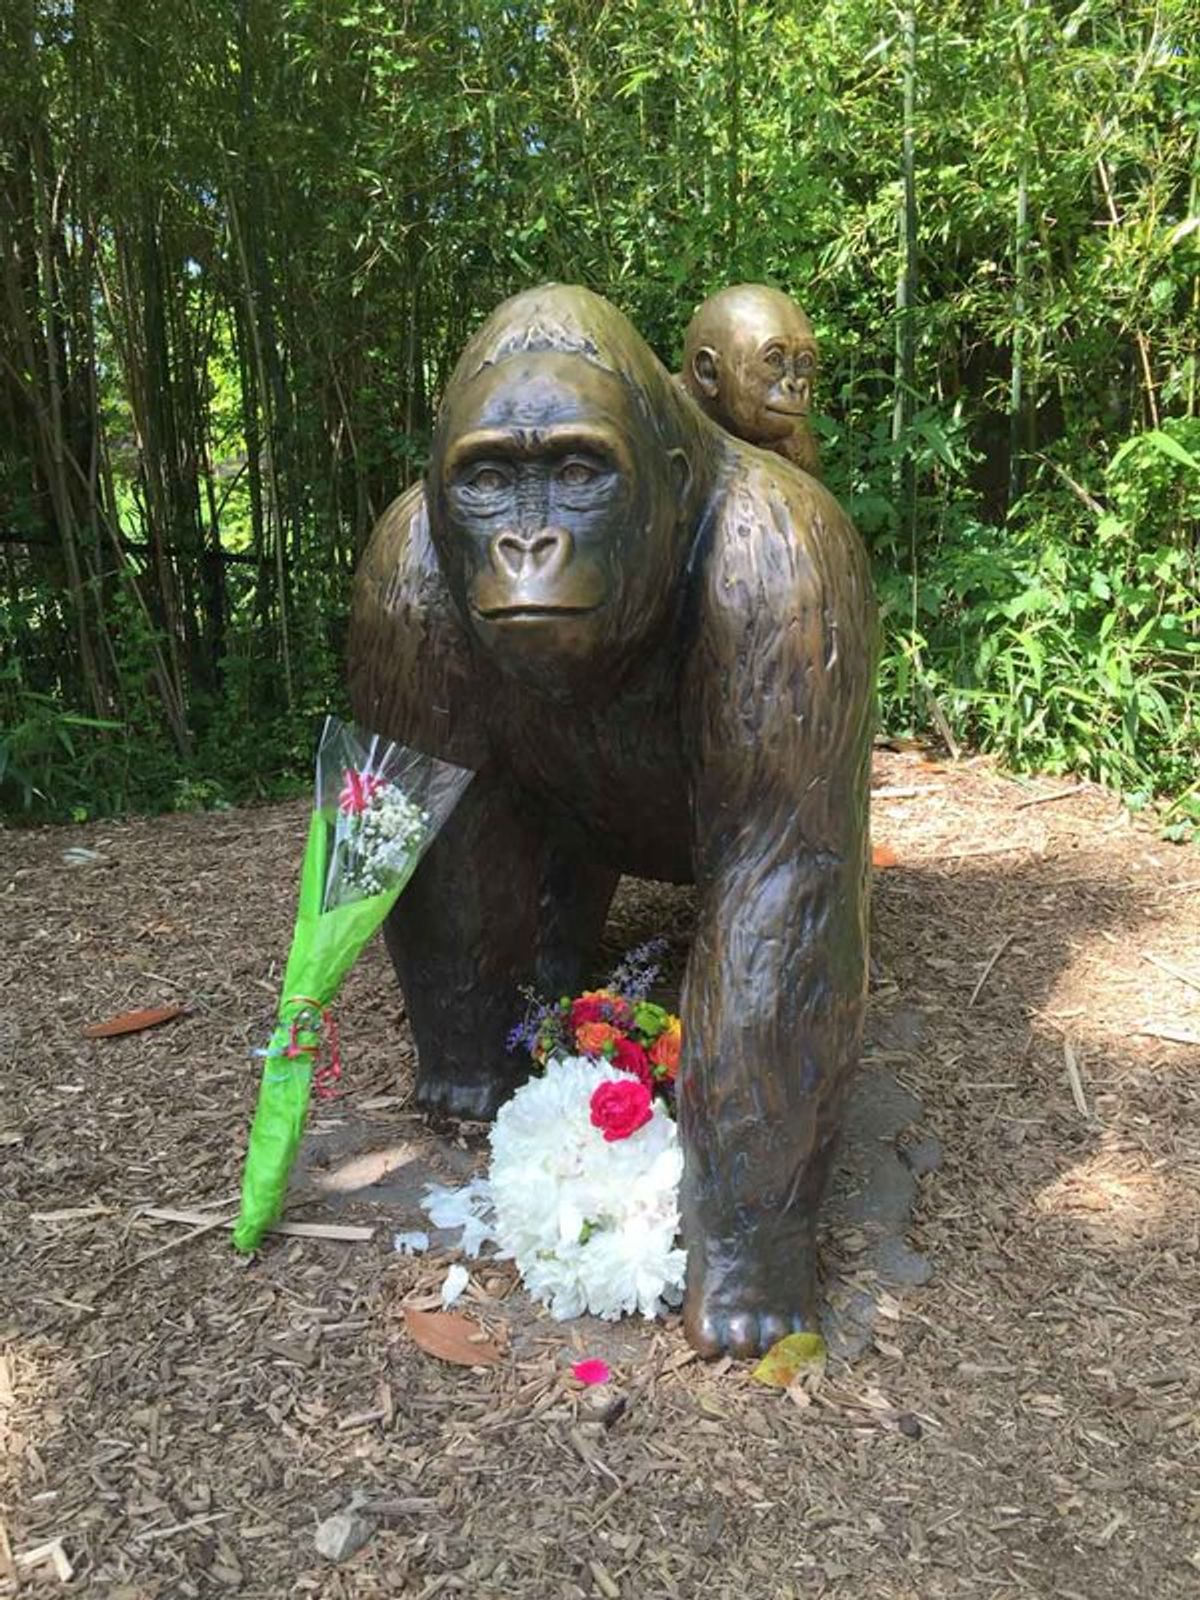 RIP Harambe: My Opinion on the Shooting of 17-Year-Old Gorilla